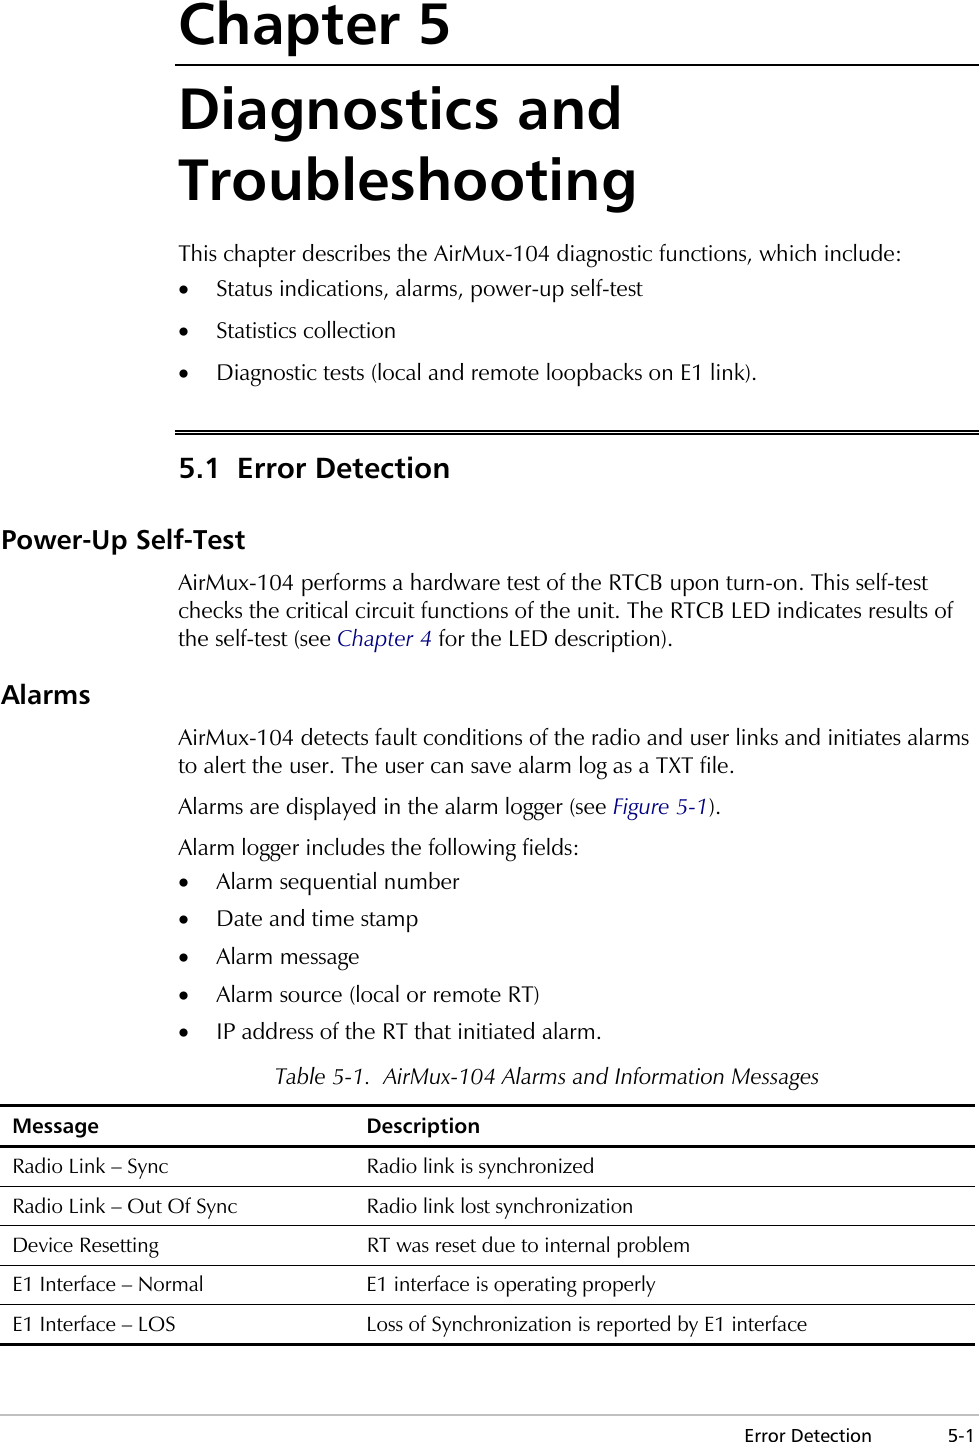  Error Detection  5-1 Chapter 5 Diagnostics and Troubleshooting This chapter describes the AirMux-104 diagnostic functions, which include: •  Status indications, alarms, power-up self-test •  Statistics collection •  Diagnostic tests (local and remote loopbacks on E1 link). 5.1 Error Detection Power-Up Self-Test AirMux-104 performs a hardware test of the RTCB upon turn-on. This self-test checks the critical circuit functions of the unit. The RTCB LED indicates results of the self-test (see Chapter 4 for the LED description). Alarms AirMux-104 detects fault conditions of the radio and user links and initiates alarms to alert the user. The user can save alarm log as a TXT file. Alarms are displayed in the alarm logger (see Figure 5-1).  Alarm logger includes the following fields: •  Alarm sequential number •  Date and time stamp •  Alarm message •  Alarm source (local or remote RT) •  IP address of the RT that initiated alarm. Table 5-1.  AirMux-104 Alarms and Information Messages Message Description Radio Link – Sync  Radio link is synchronized Radio Link – Out Of Sync  Radio link lost synchronization Device Resetting  RT was reset due to internal problem E1 Interface – Normal  E1 interface is operating properly E1 Interface – LOS  Loss of Synchronization is reported by E1 interface 